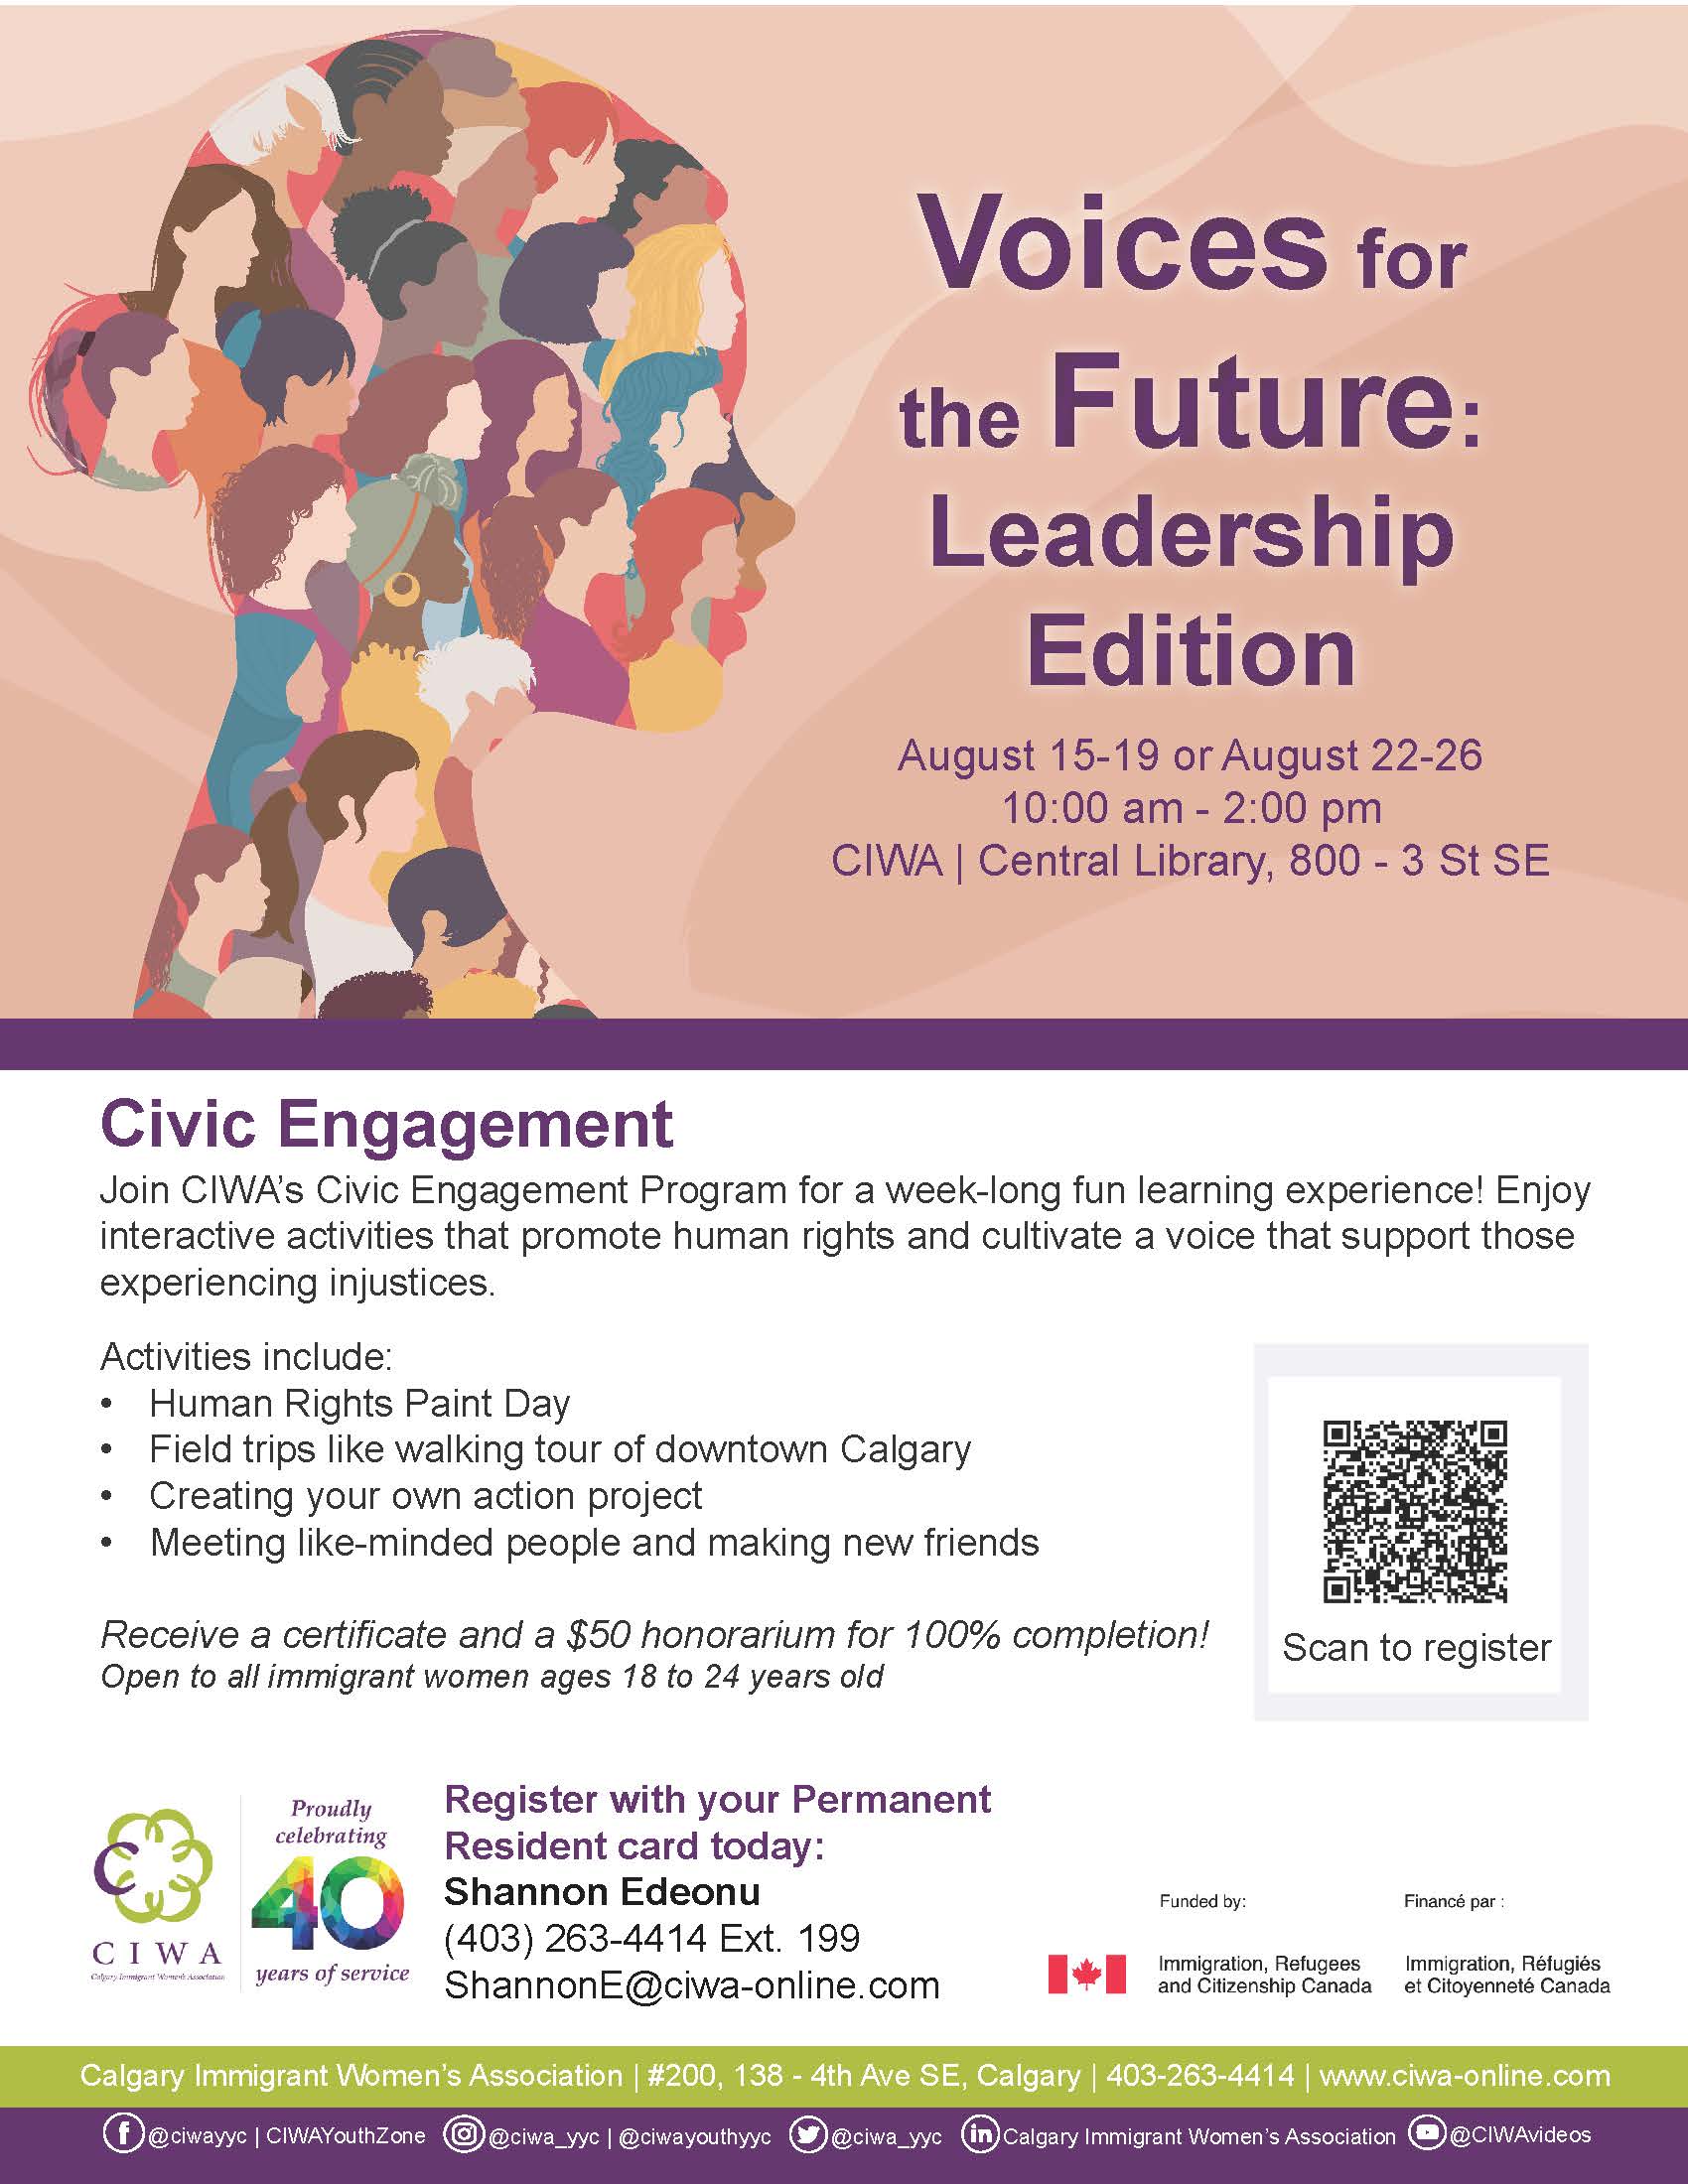 Voices for the Future: Leadership Edition